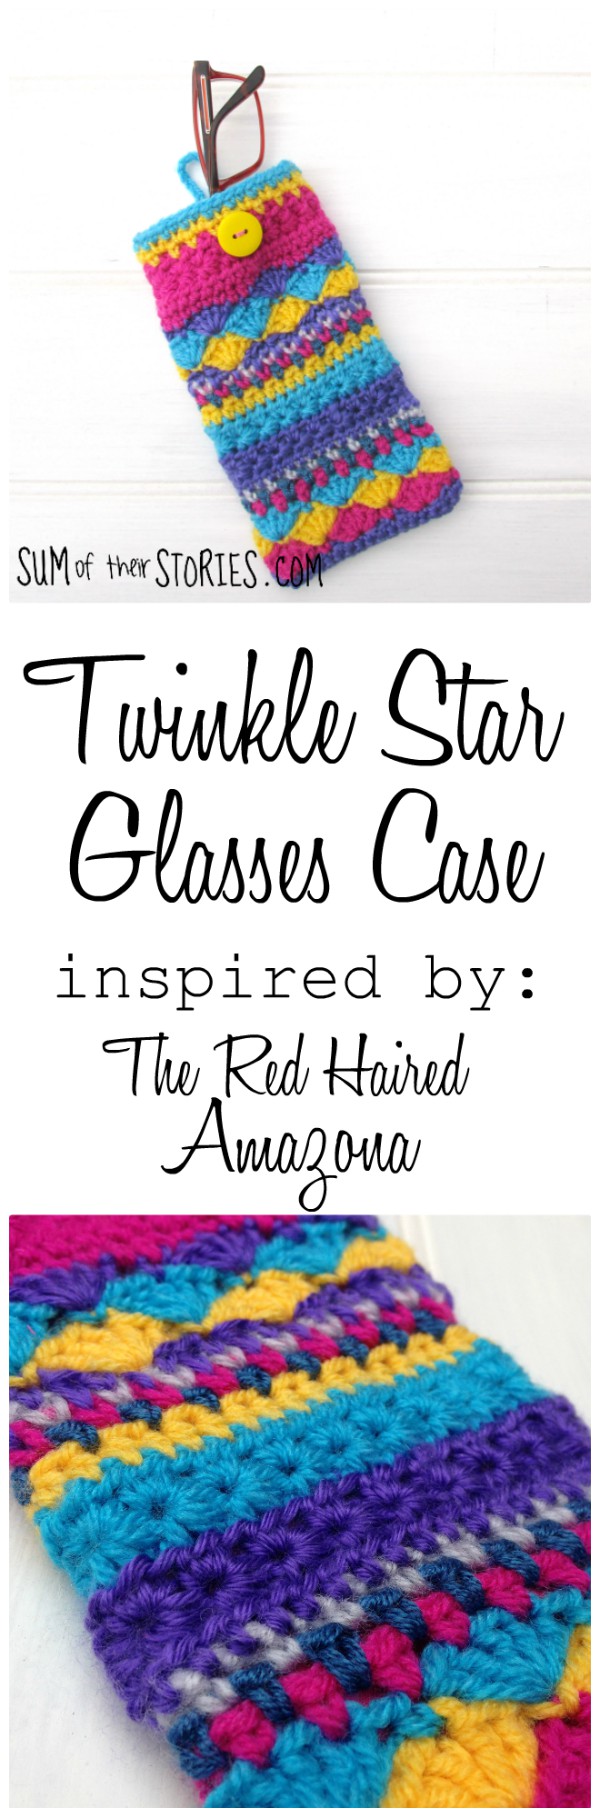 Twinkle star crocheted glasses case instructions